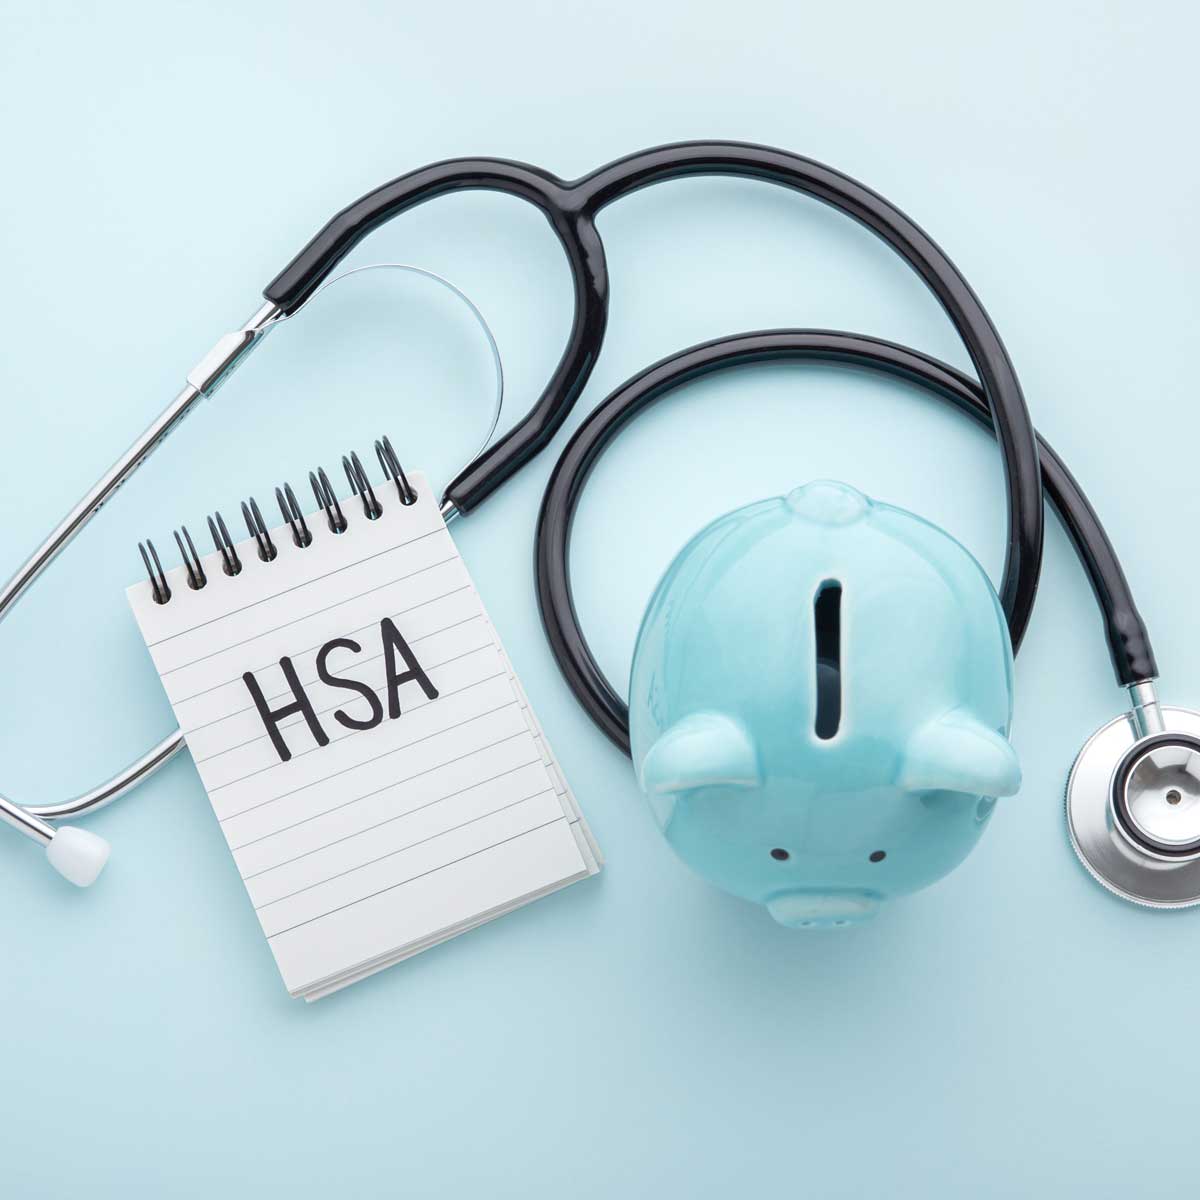 Health saving account, hsa concept on blue background